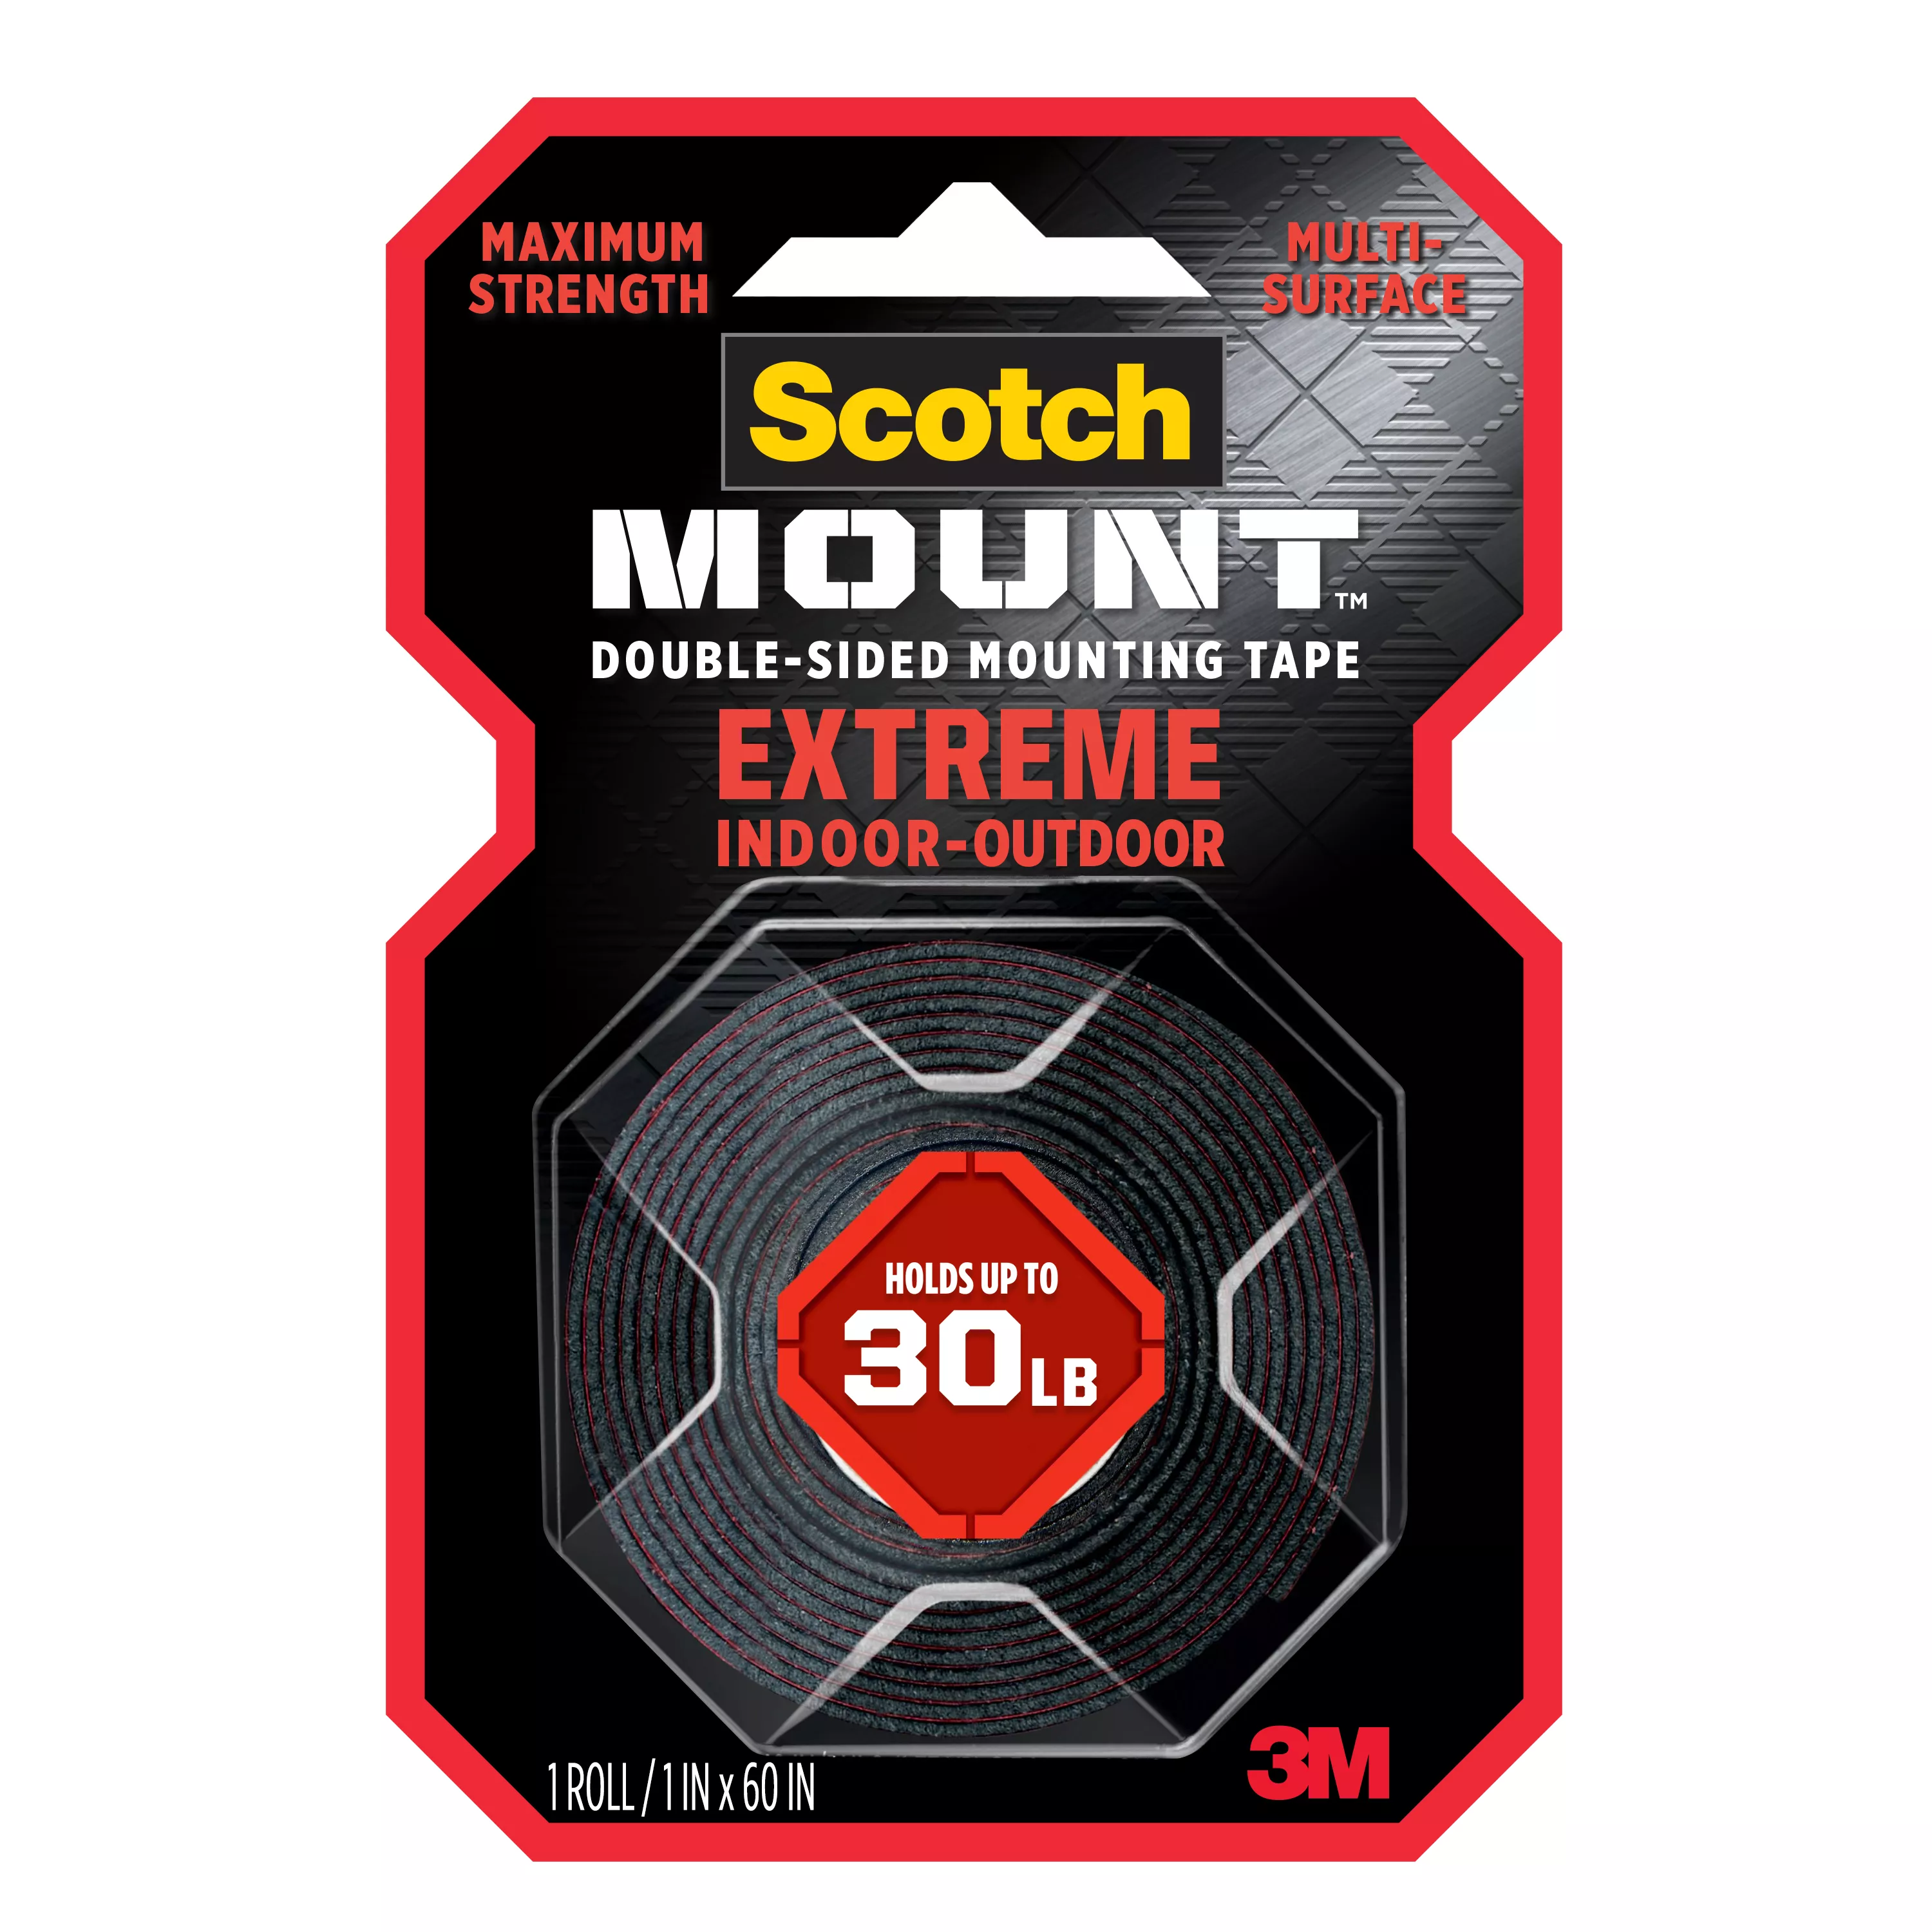 SKU 7100205652 | Scotch-Mount™ Extreme Double-Sided Mounting Tape 414H